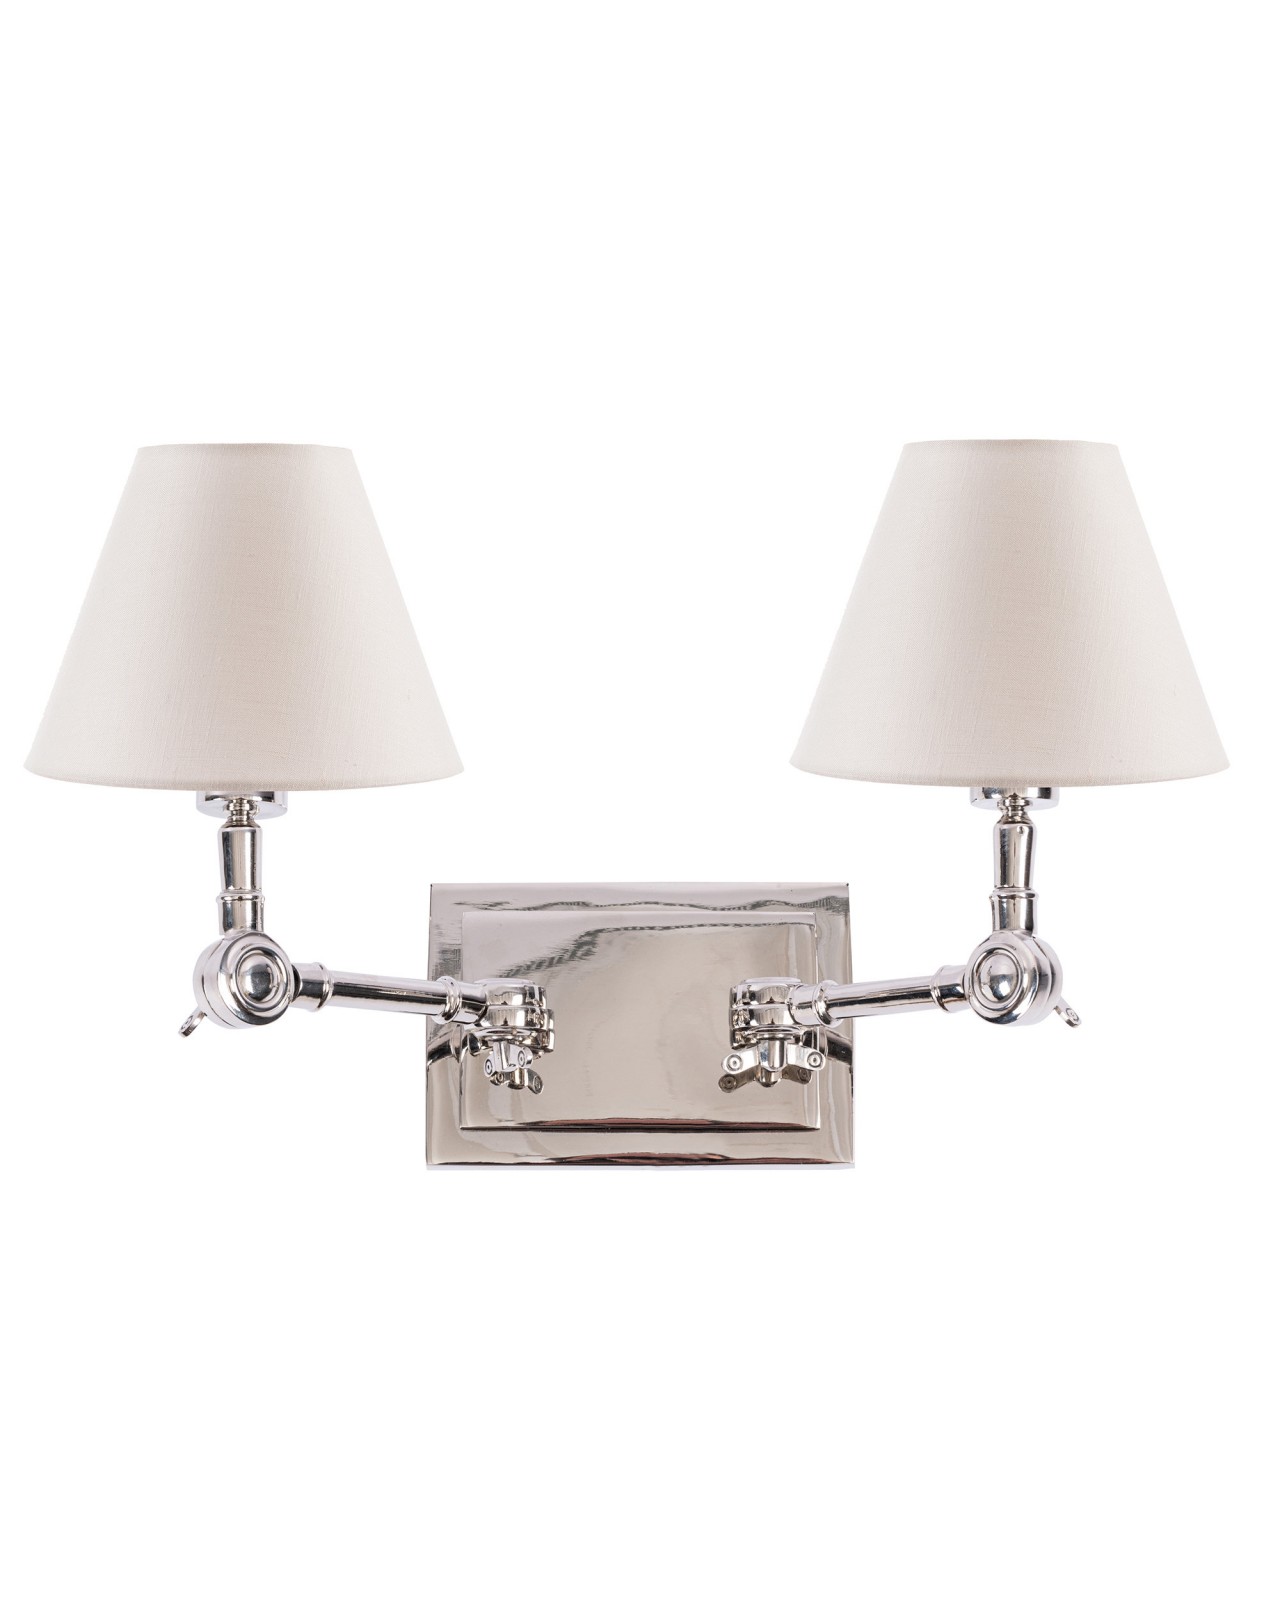 JOYCE Double Arm Sconce in Polished Nickel